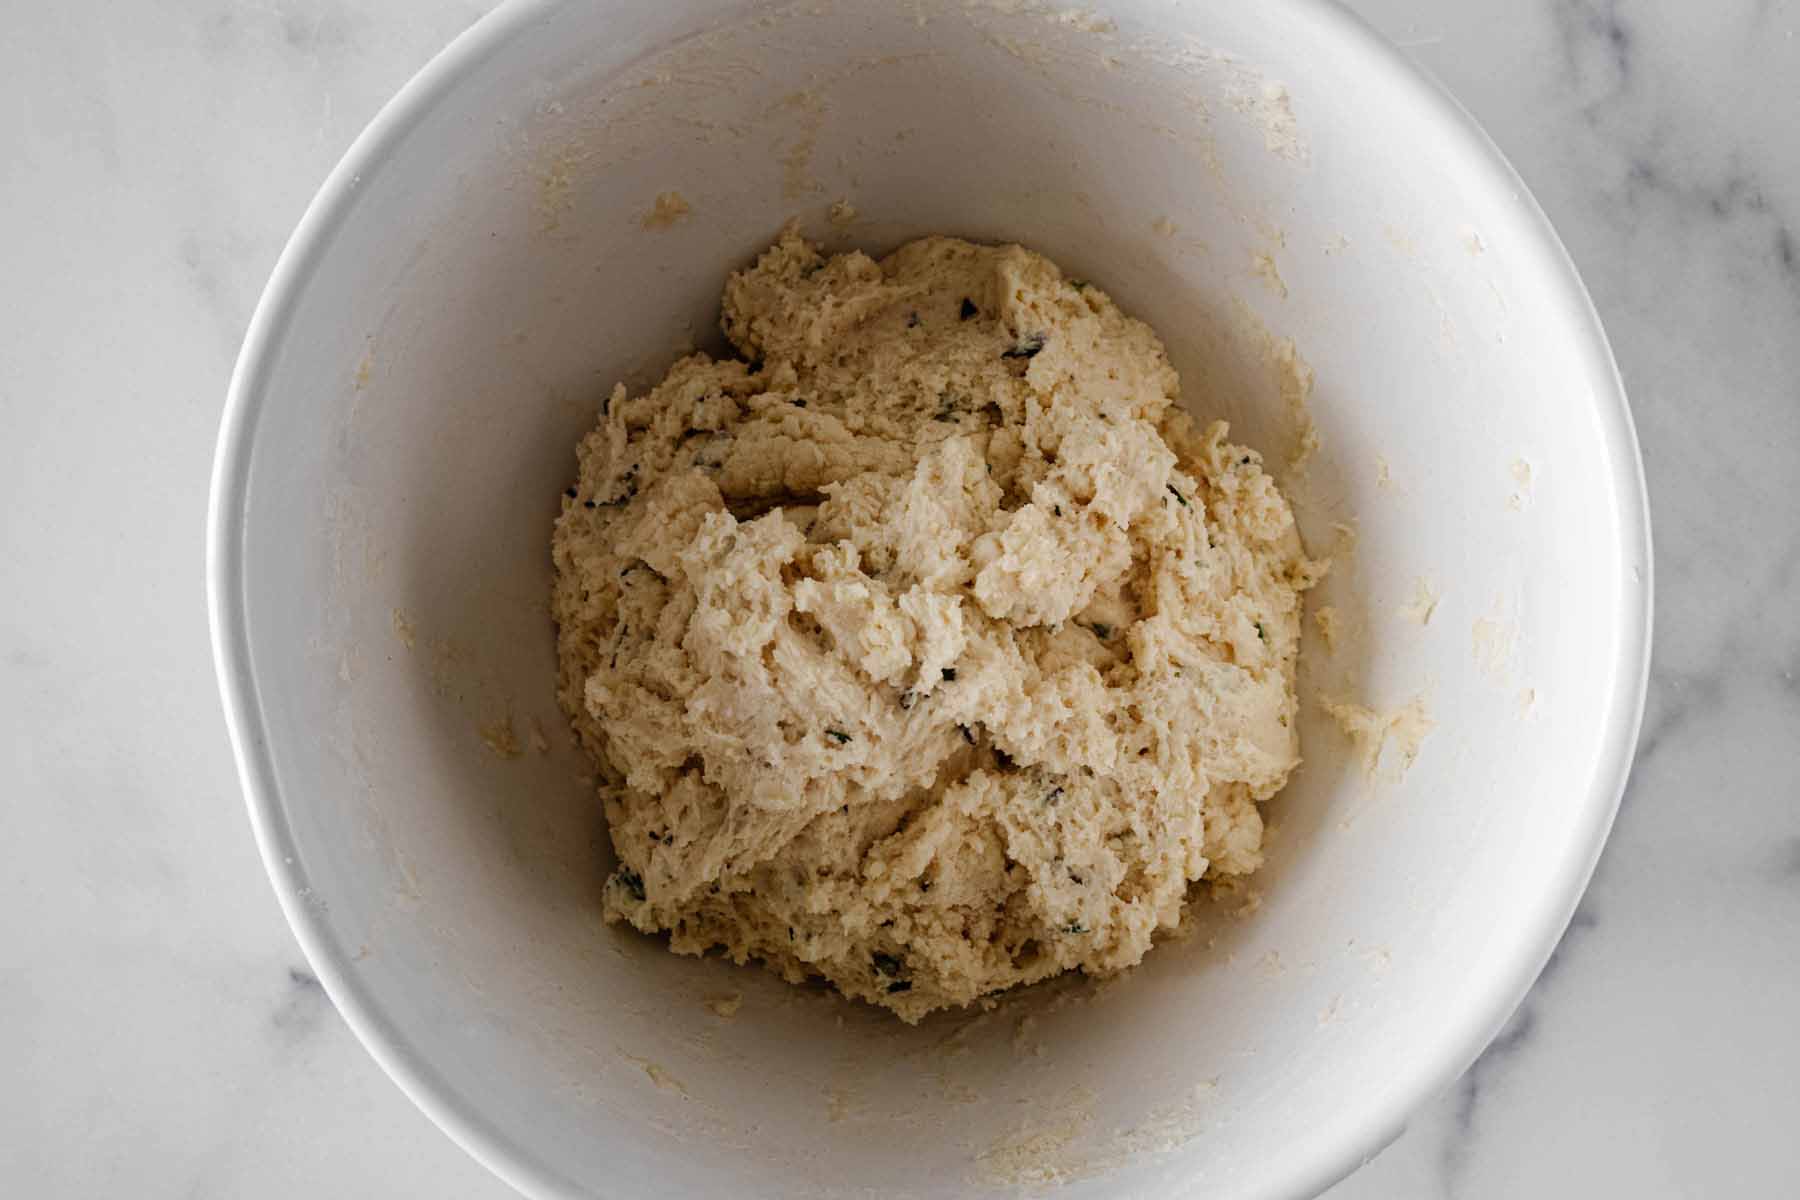 Rosemary biscuit dough in a white bowl.